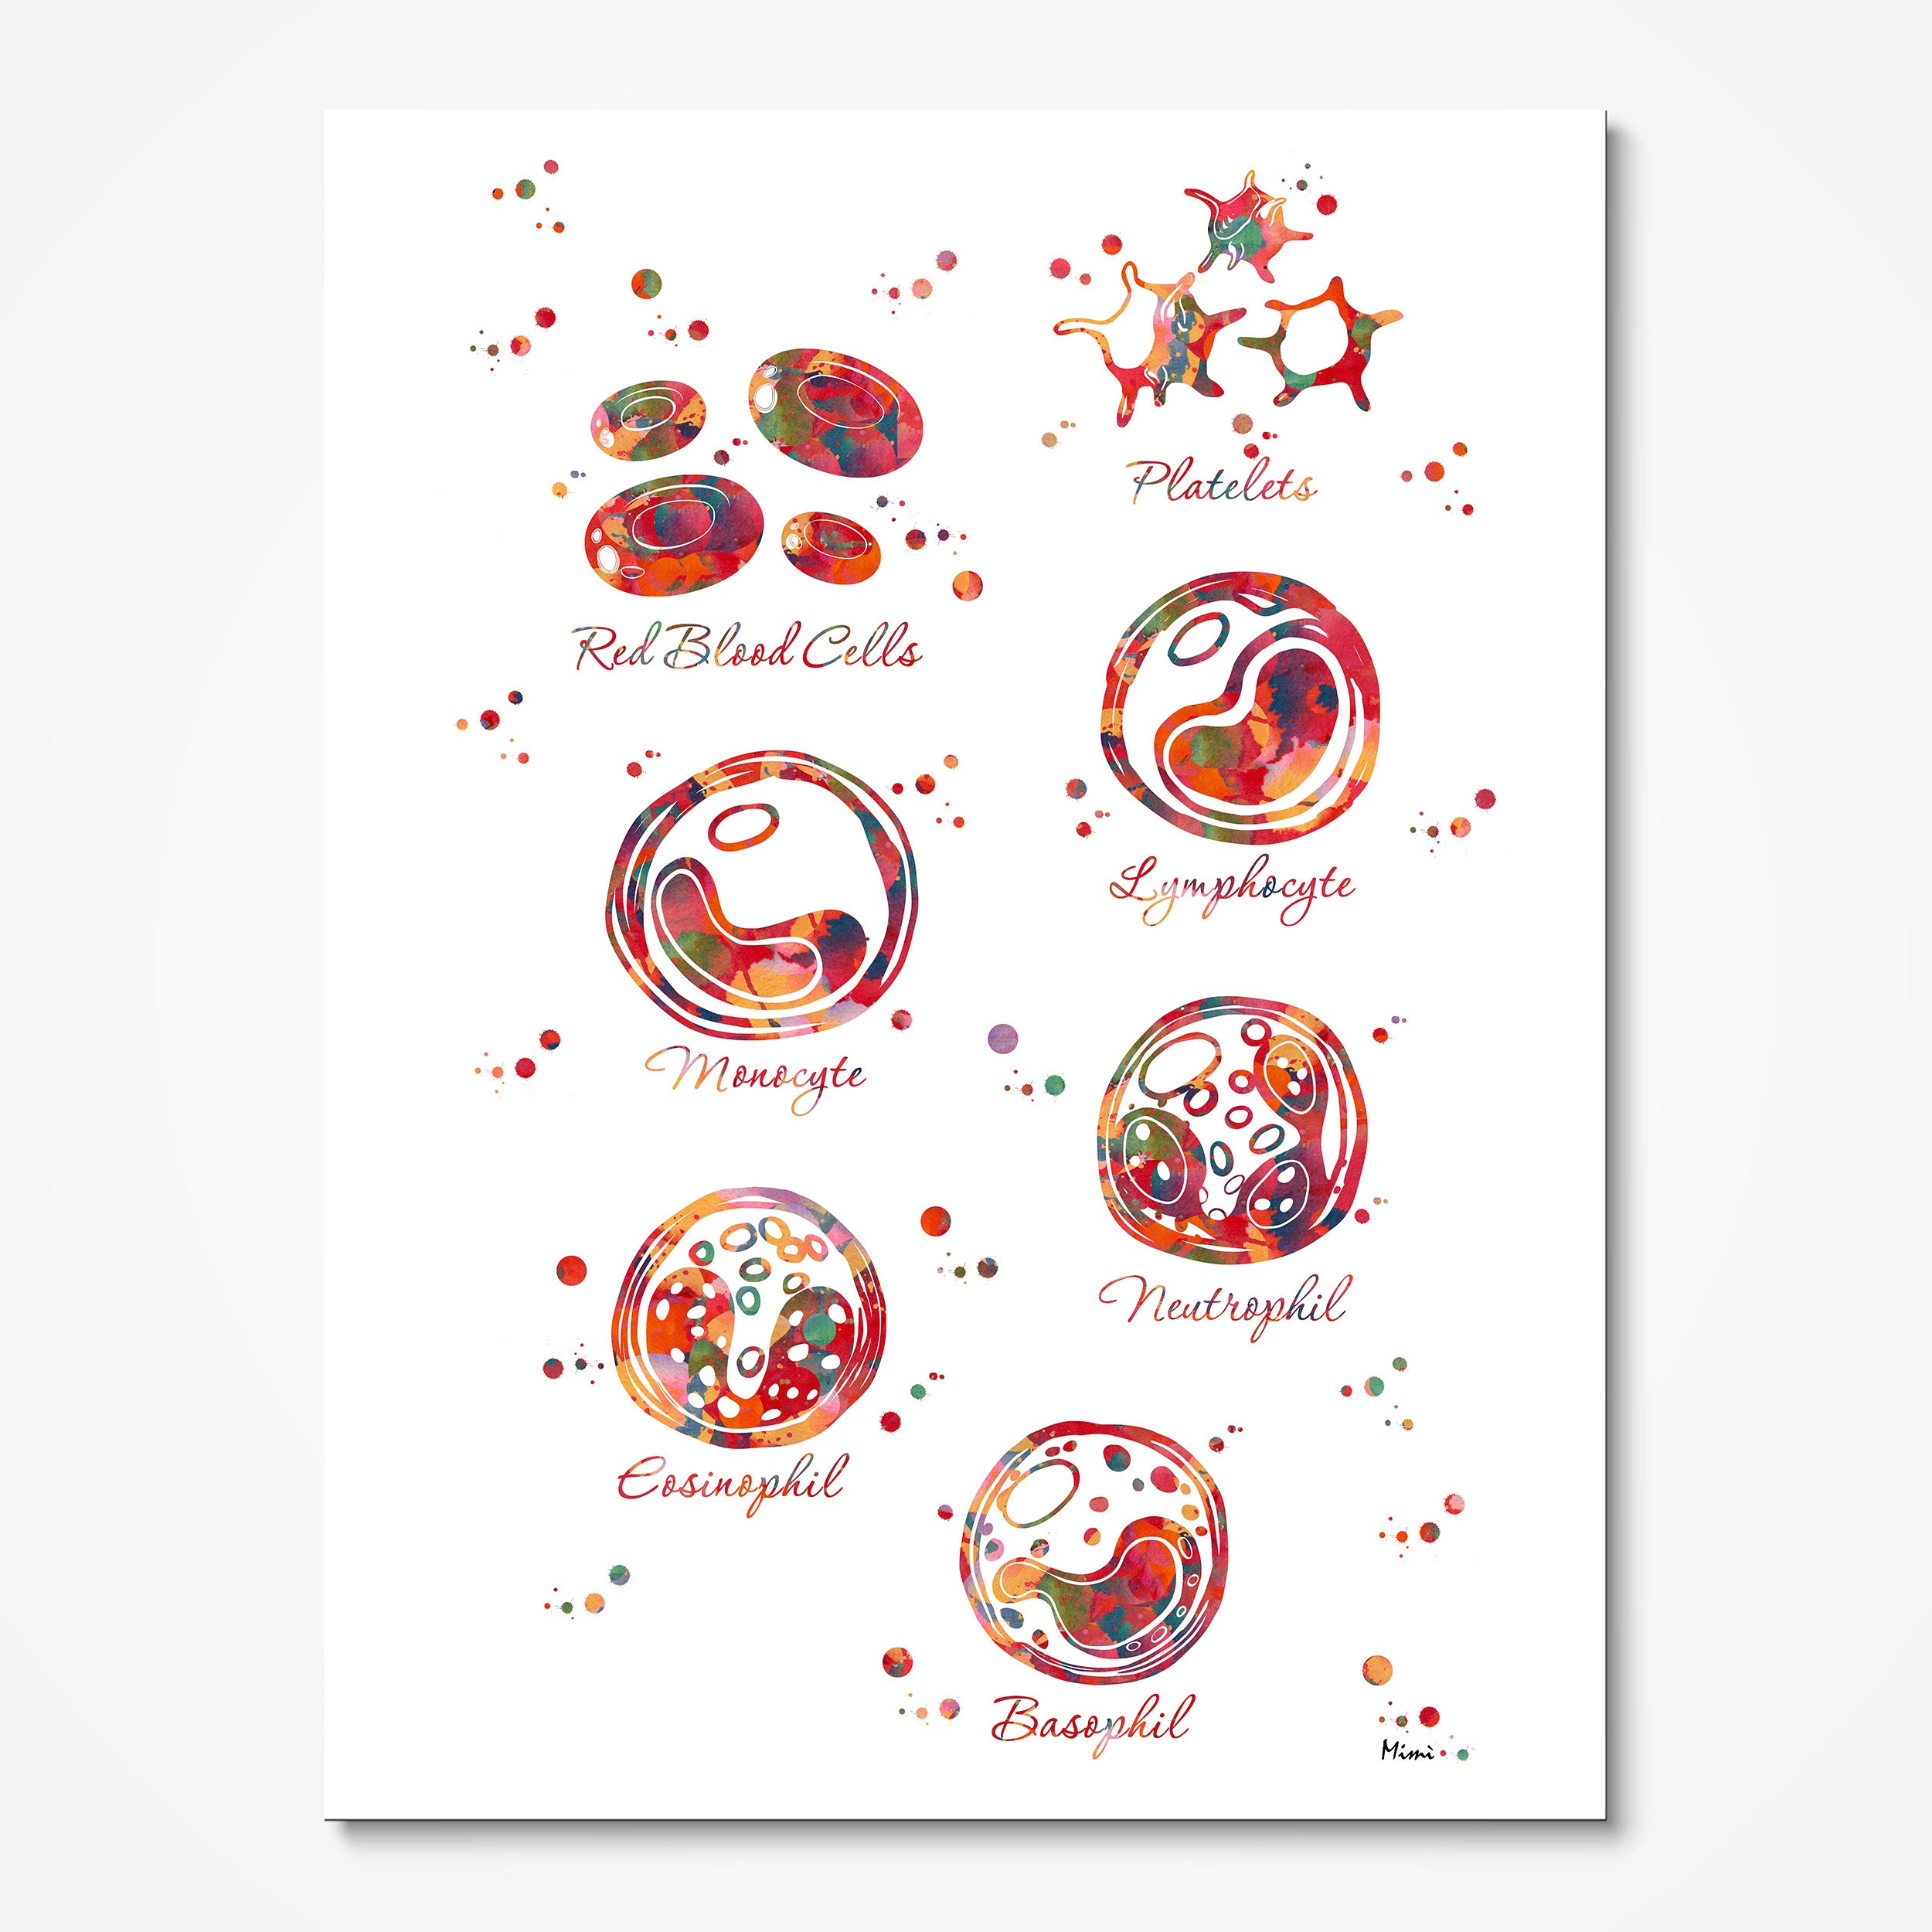 Blood Cells Watercolor Print Image